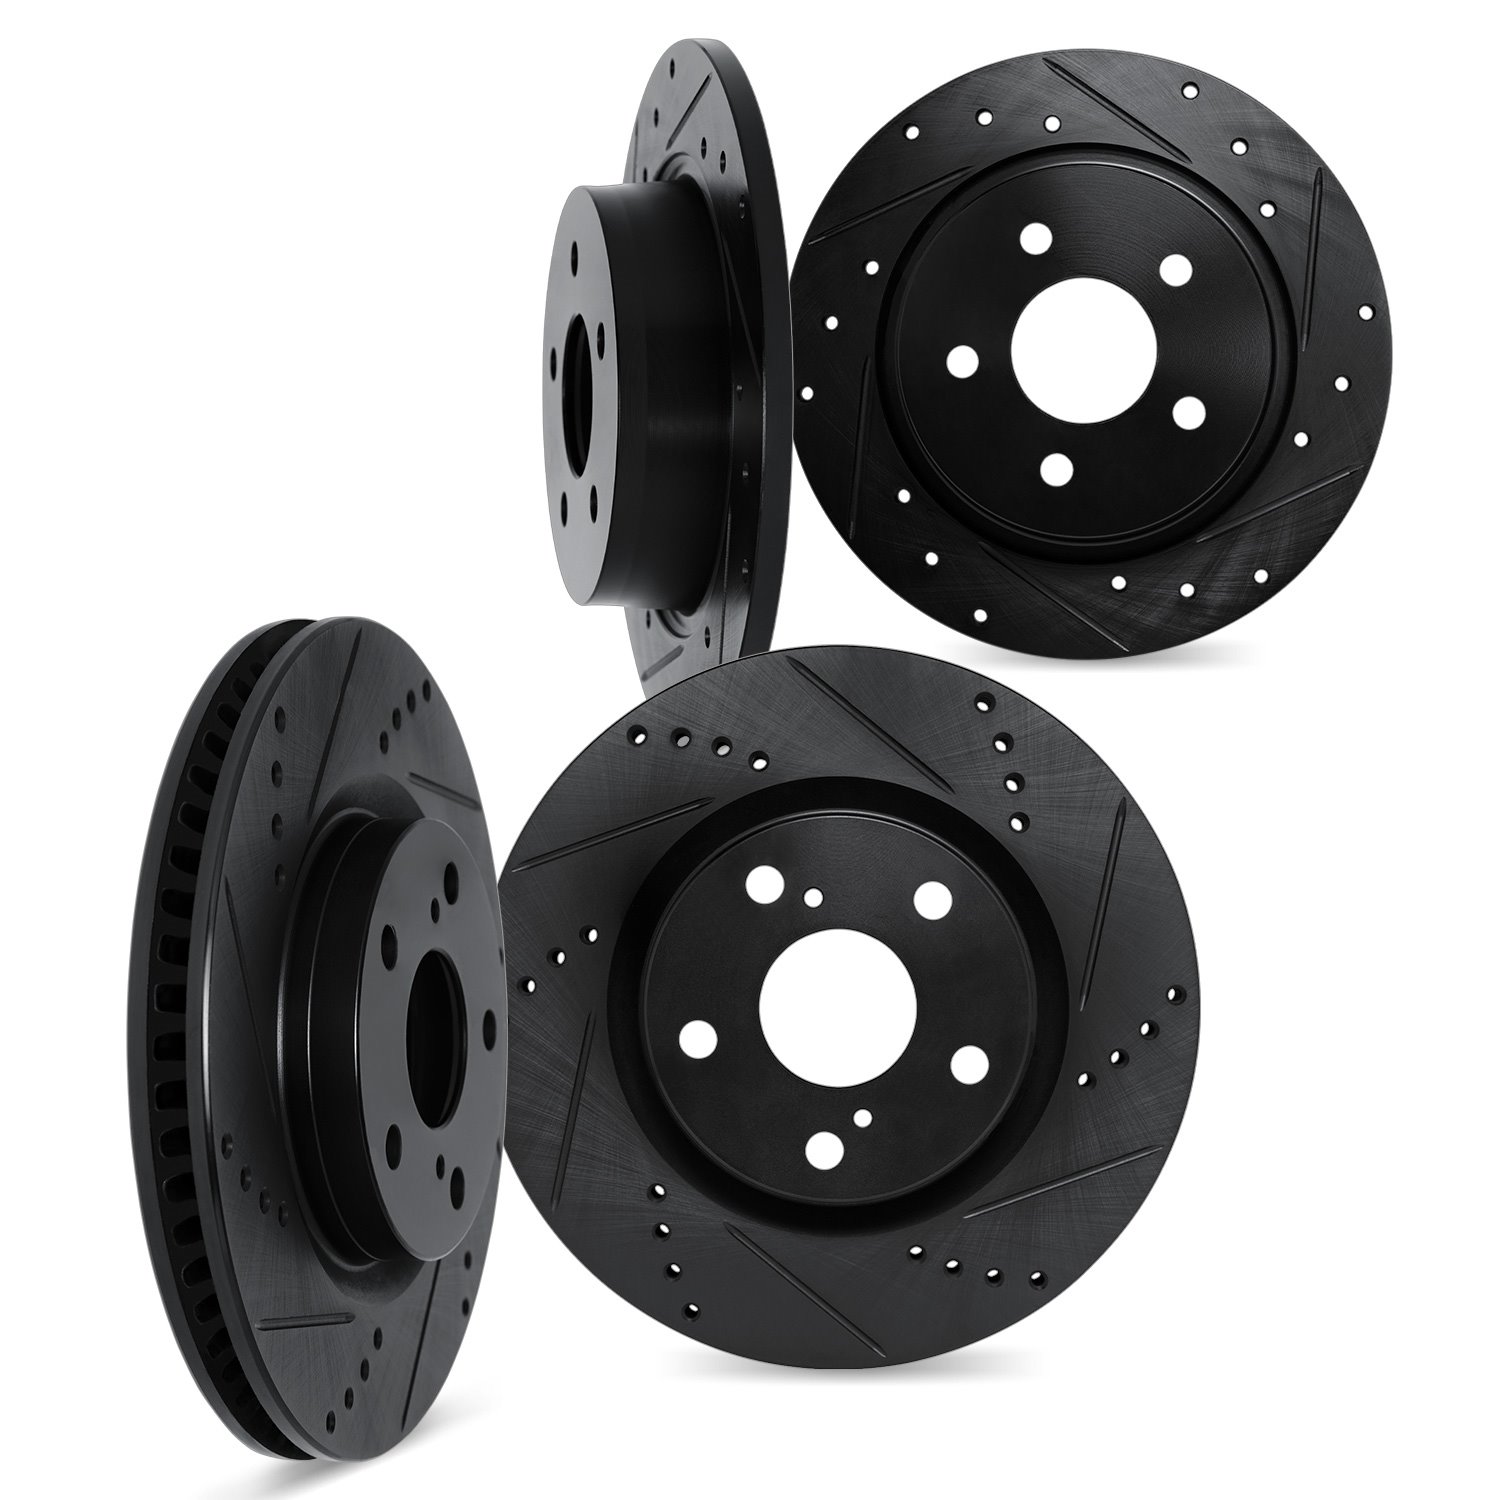 8004-73056 Drilled/Slotted Brake Rotors [Black], Fits Select Audi/Volkswagen, Position: Front and Rear